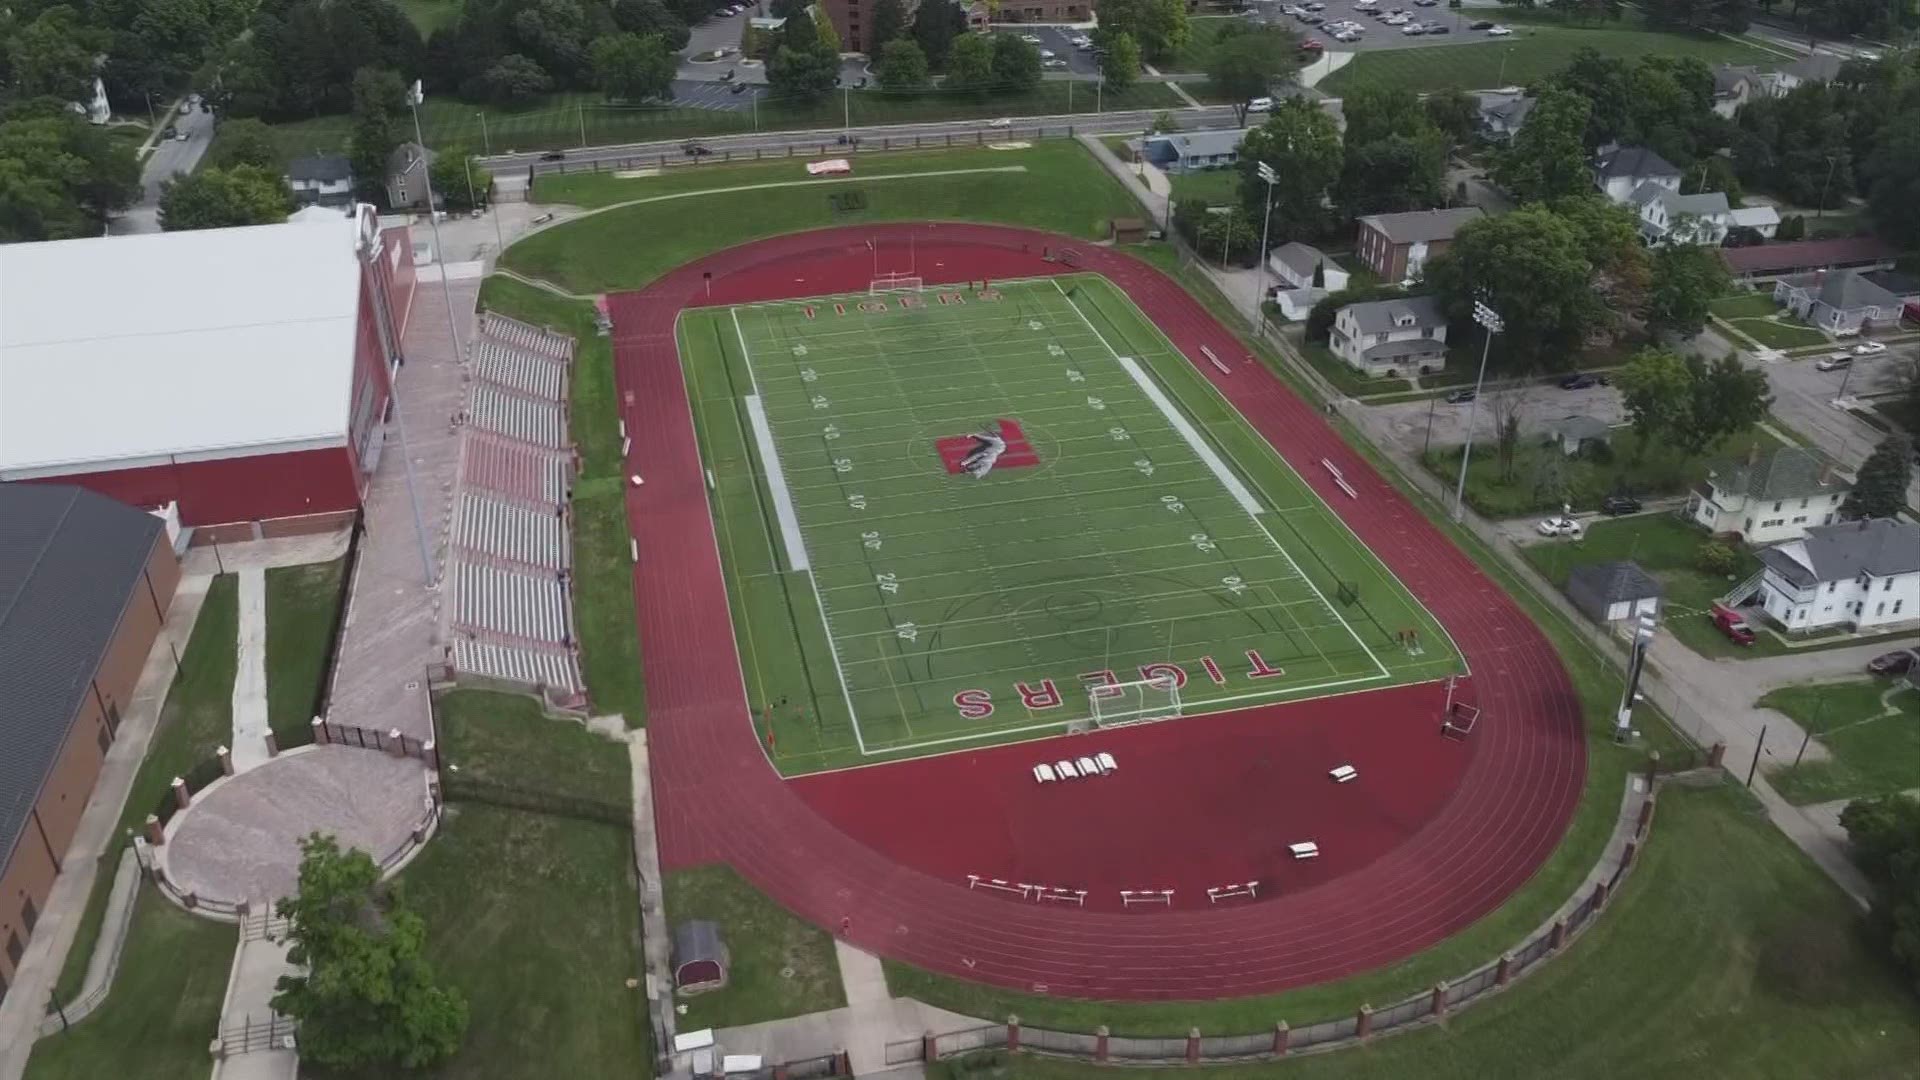 Student-athletes at Wittenberg University account for 40% of the student population